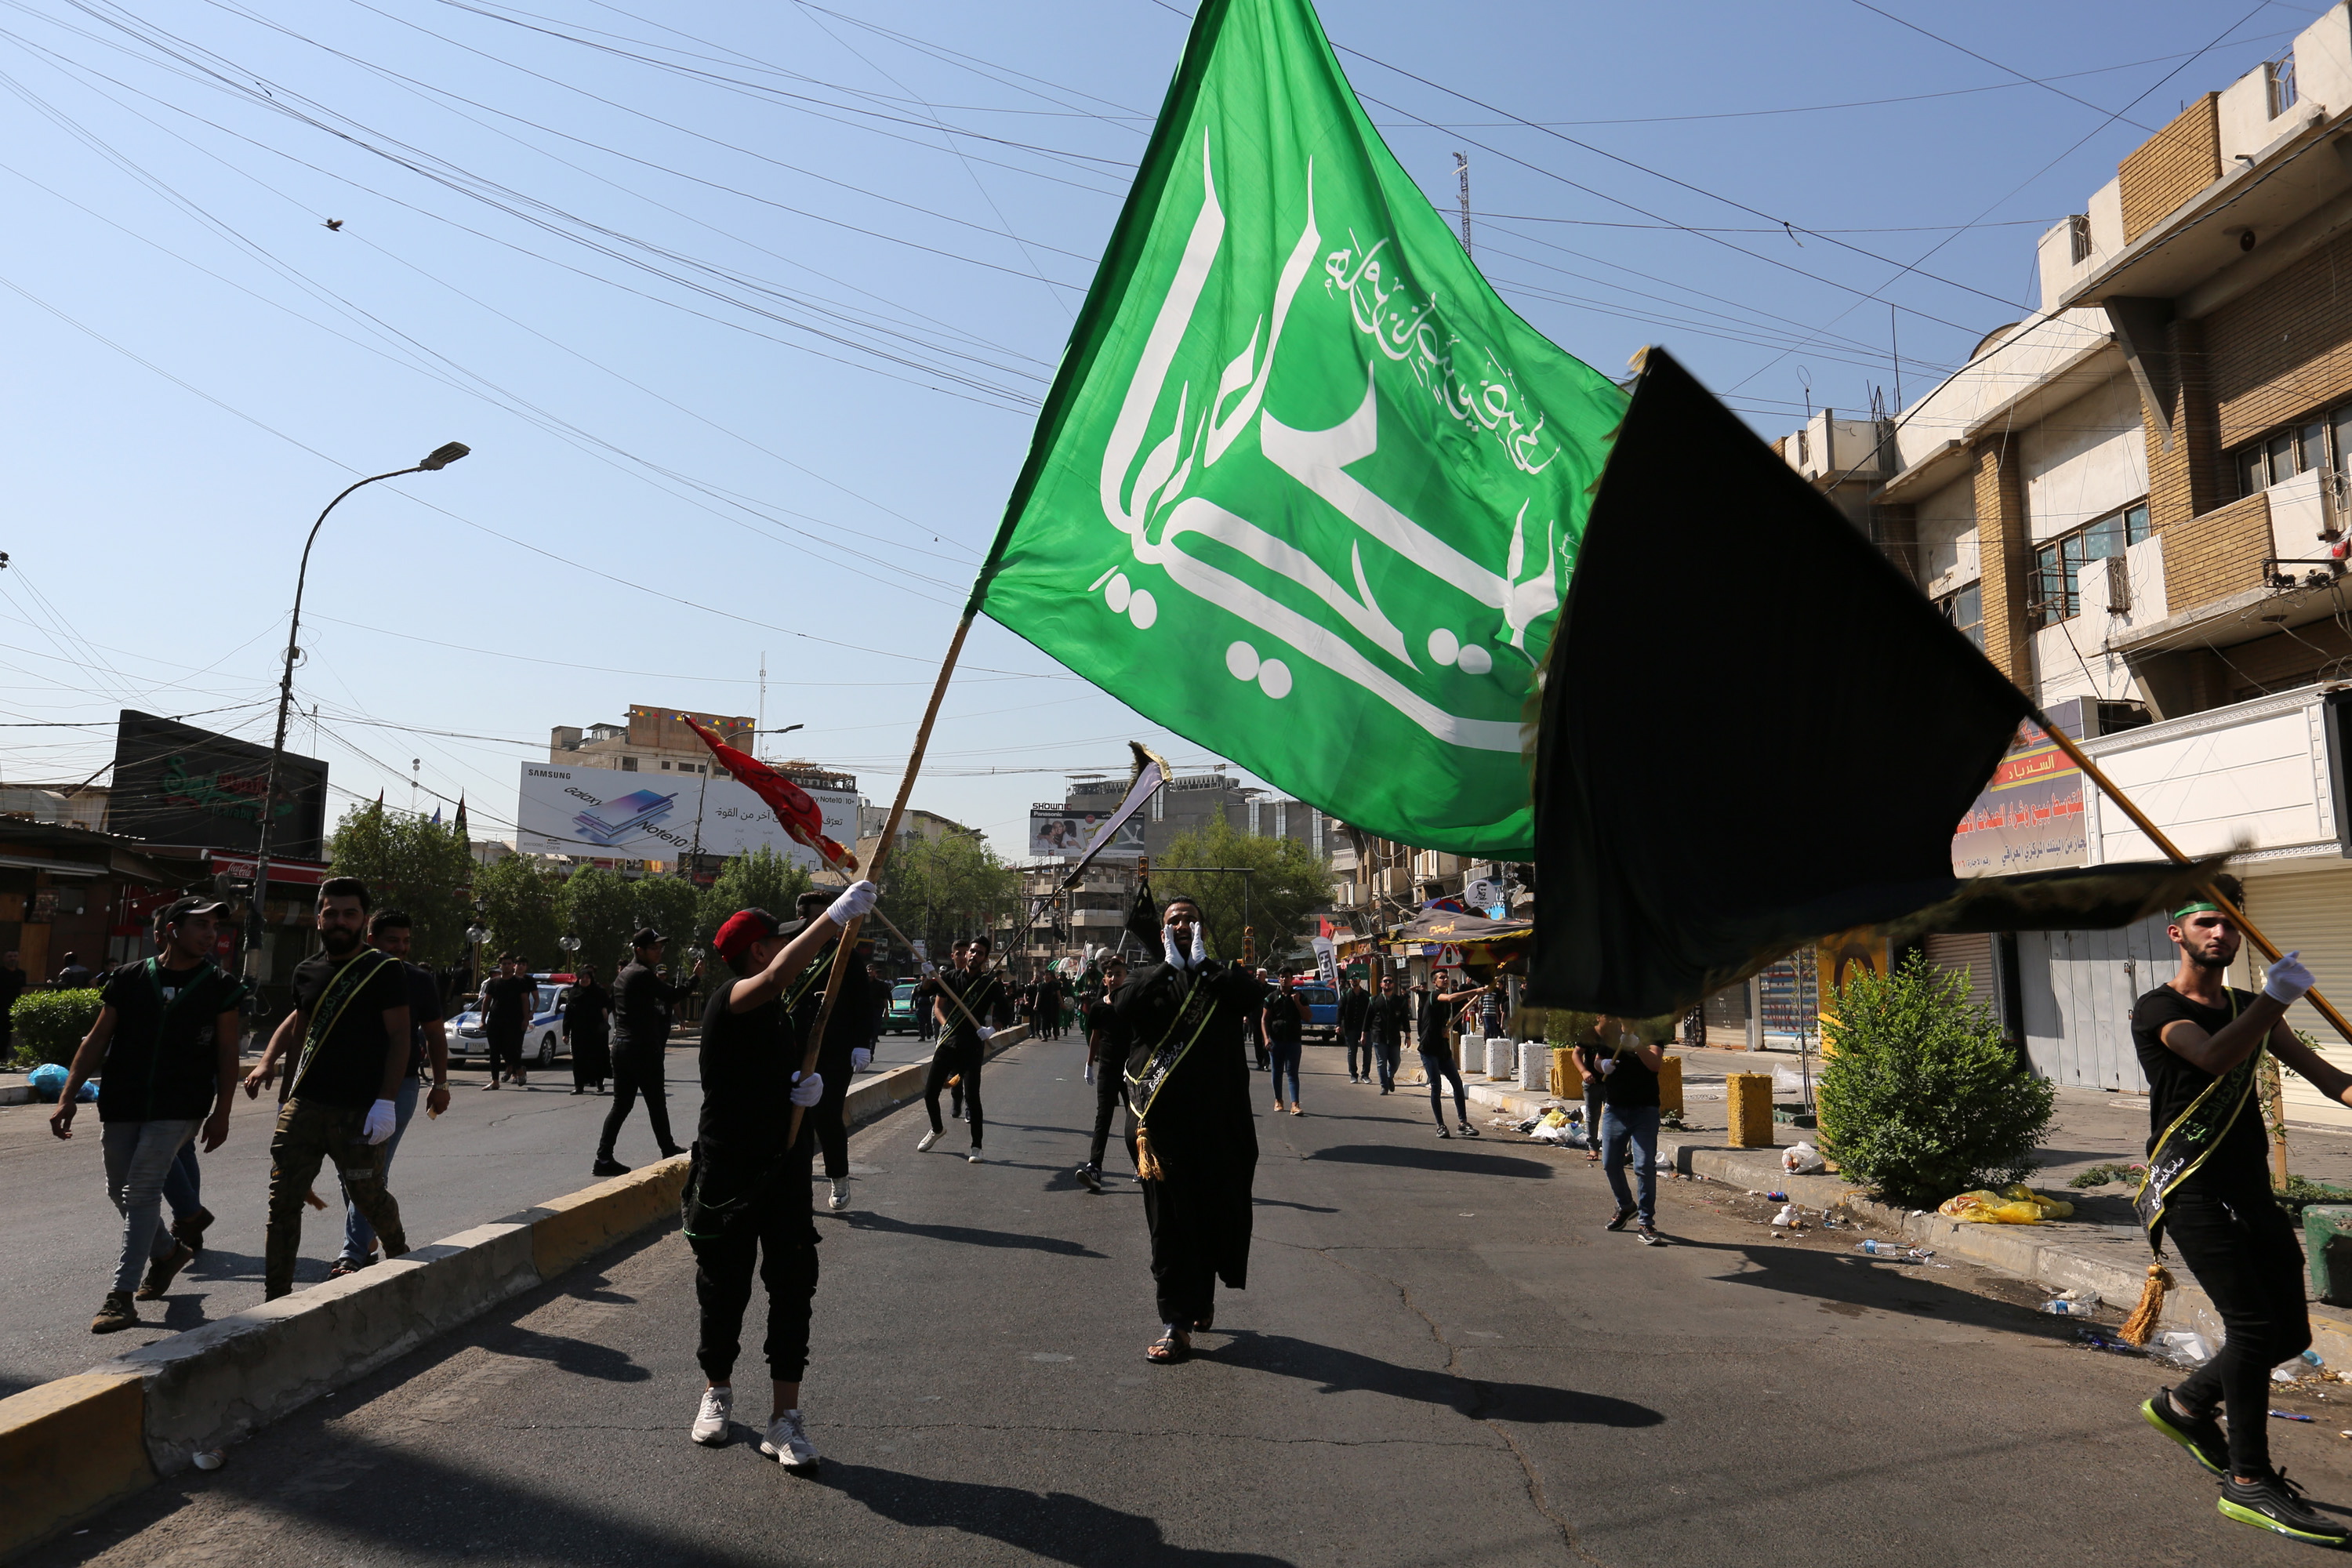 epa07832398 Iraqi Shiite men carry religious flags during the Ashura festivals at Karada district, in central Baghdad, Iraq, 10 September 2019. The Ashura day commemorates the death anniversary of the third Shiite Imam Hussein, who was grandson of Muslim Prophet Muhammed. Ashura is the peak of ten days of mourning when Shiite Muslims mourn the killing of Imam Hussein whose shrine is in Karbala in southern Iraq.  EPA/AHMED JALIL